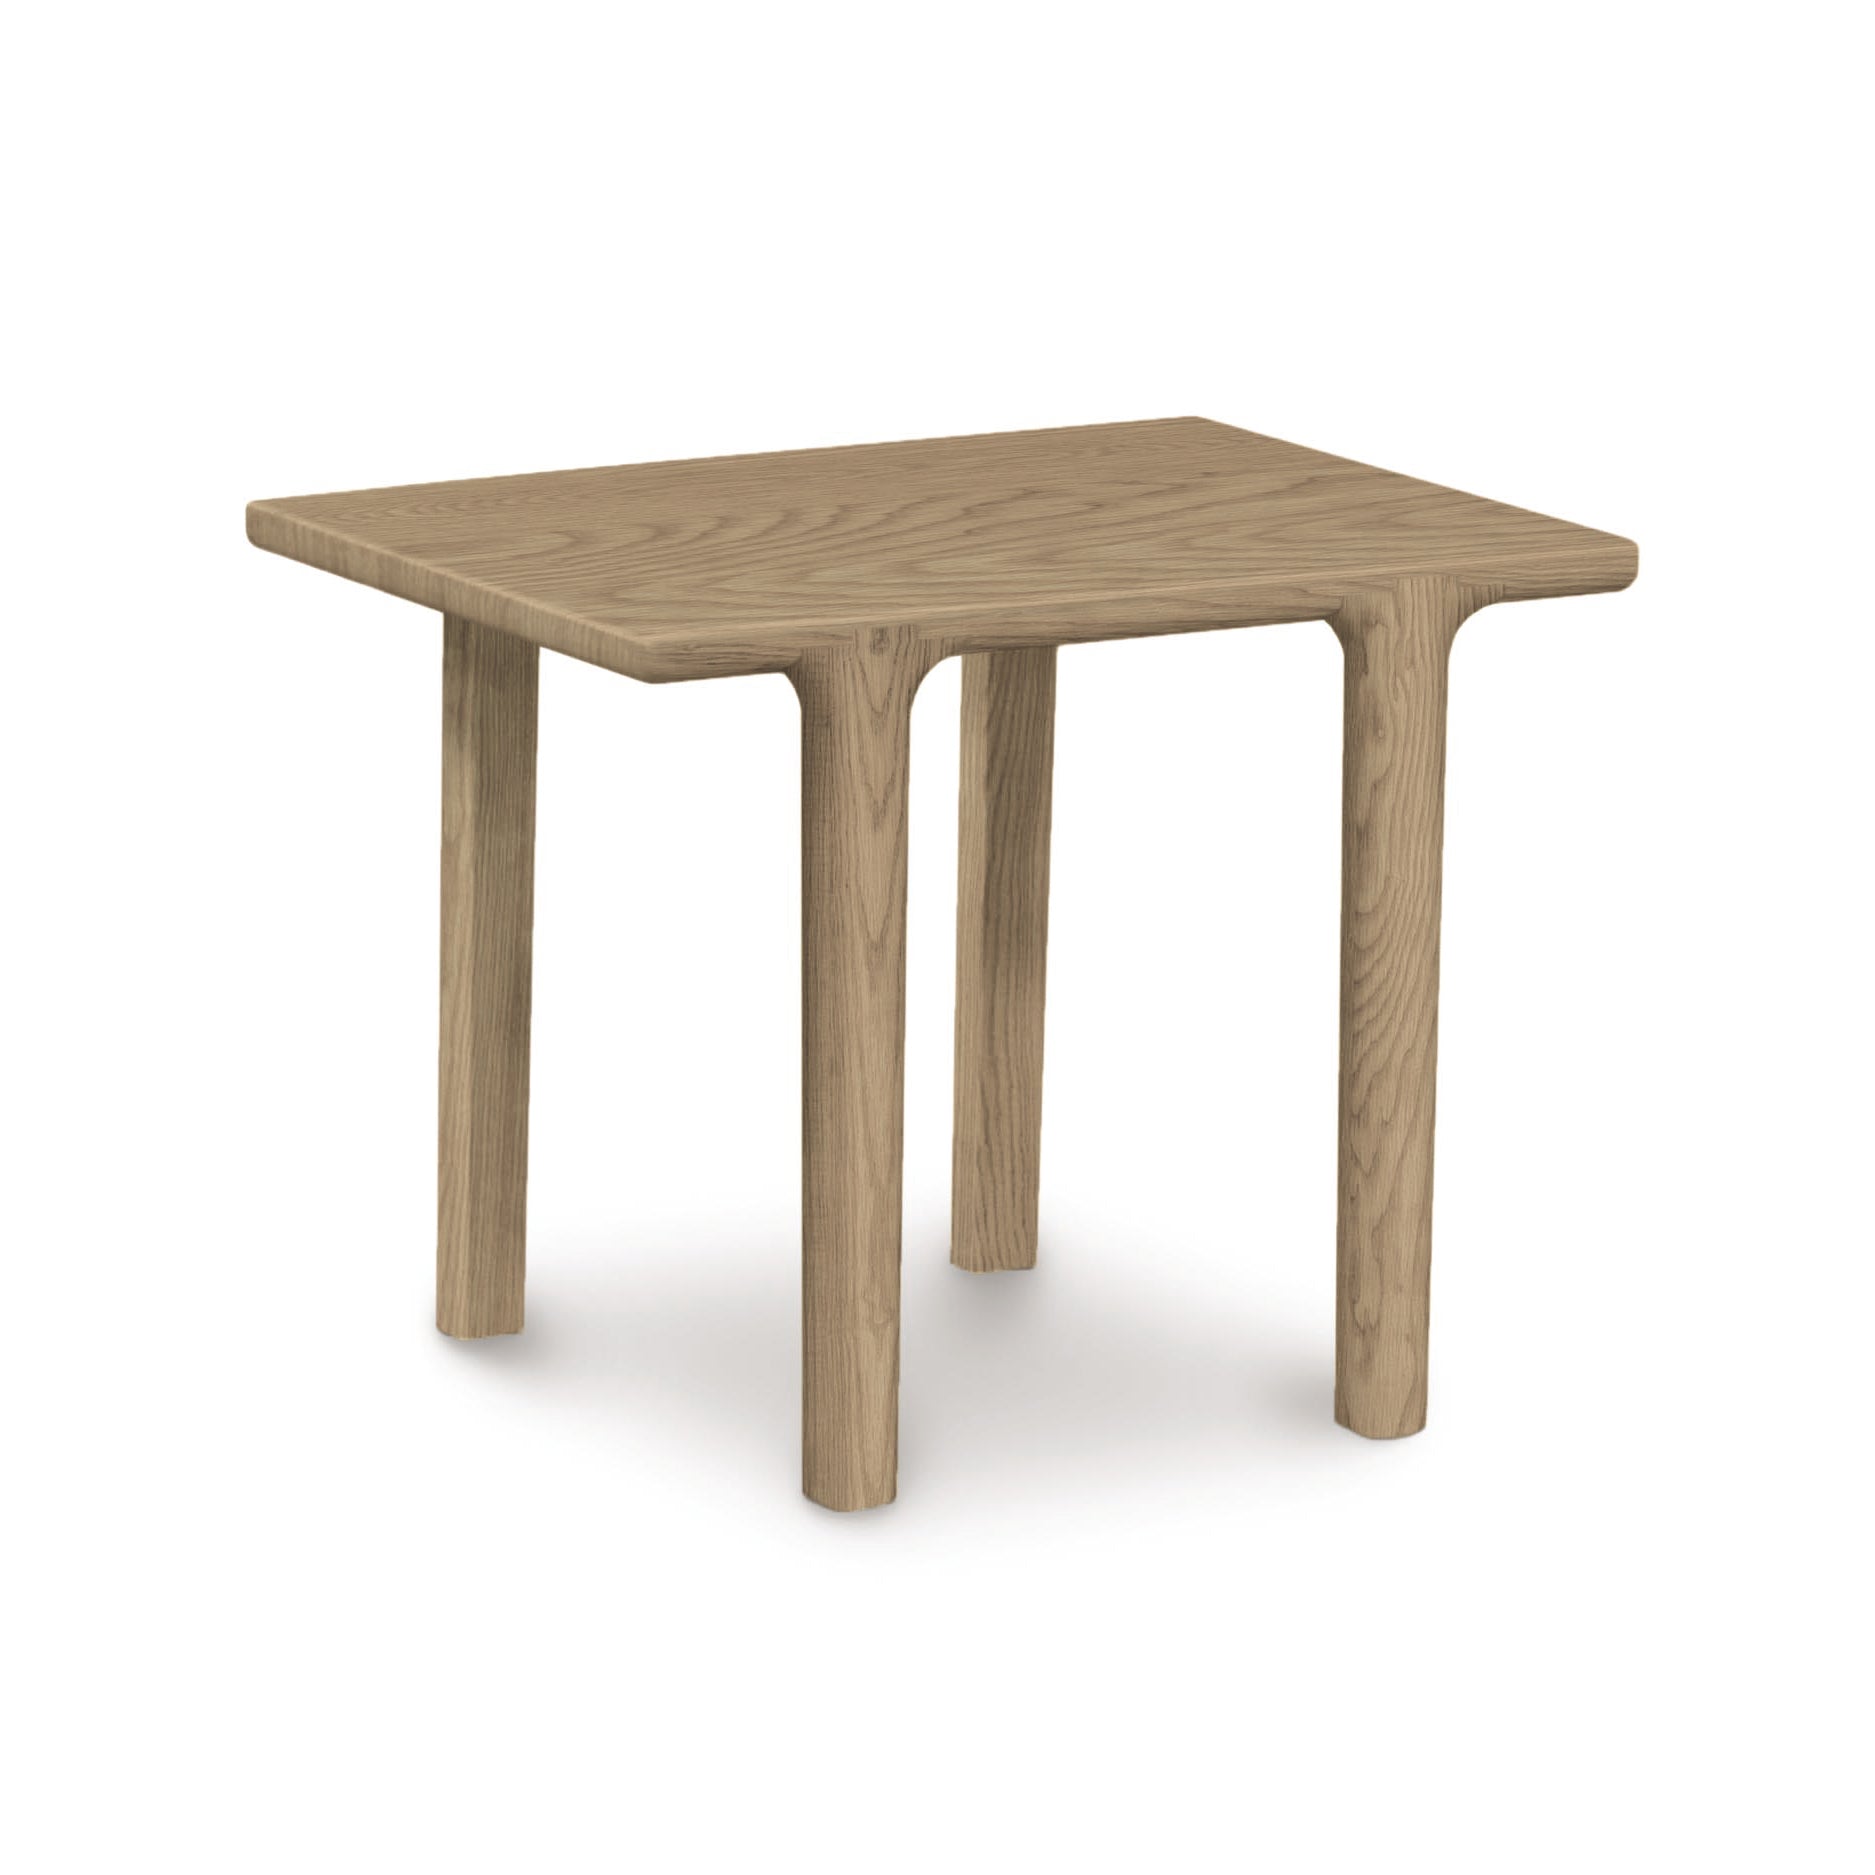 The Copeland Furniture Sierra Rectangular End Table, with its modern personality, features a small wooden table supported by two legs. It sits against a white background, providing a fresh and clean aesthetic.